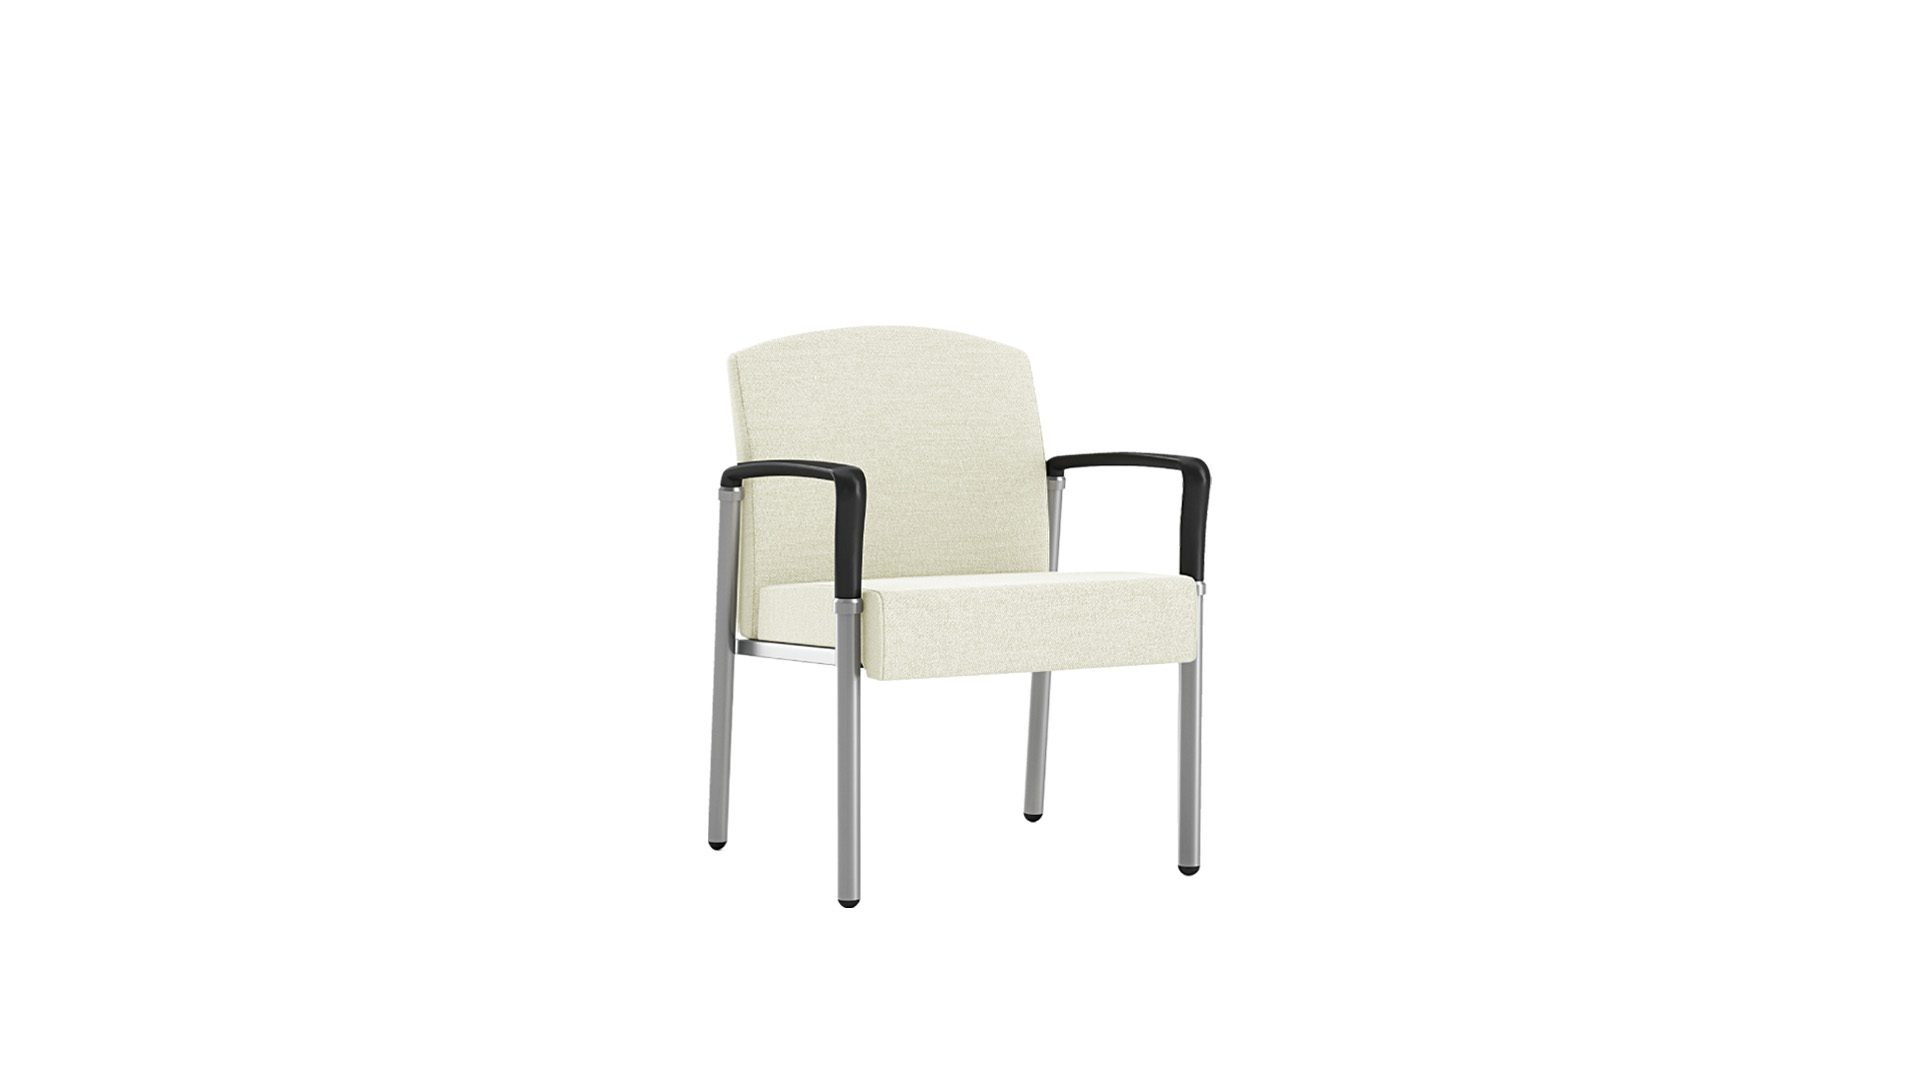 NTG110-WA Integrity Guest Chair with Arms and 21" Seat